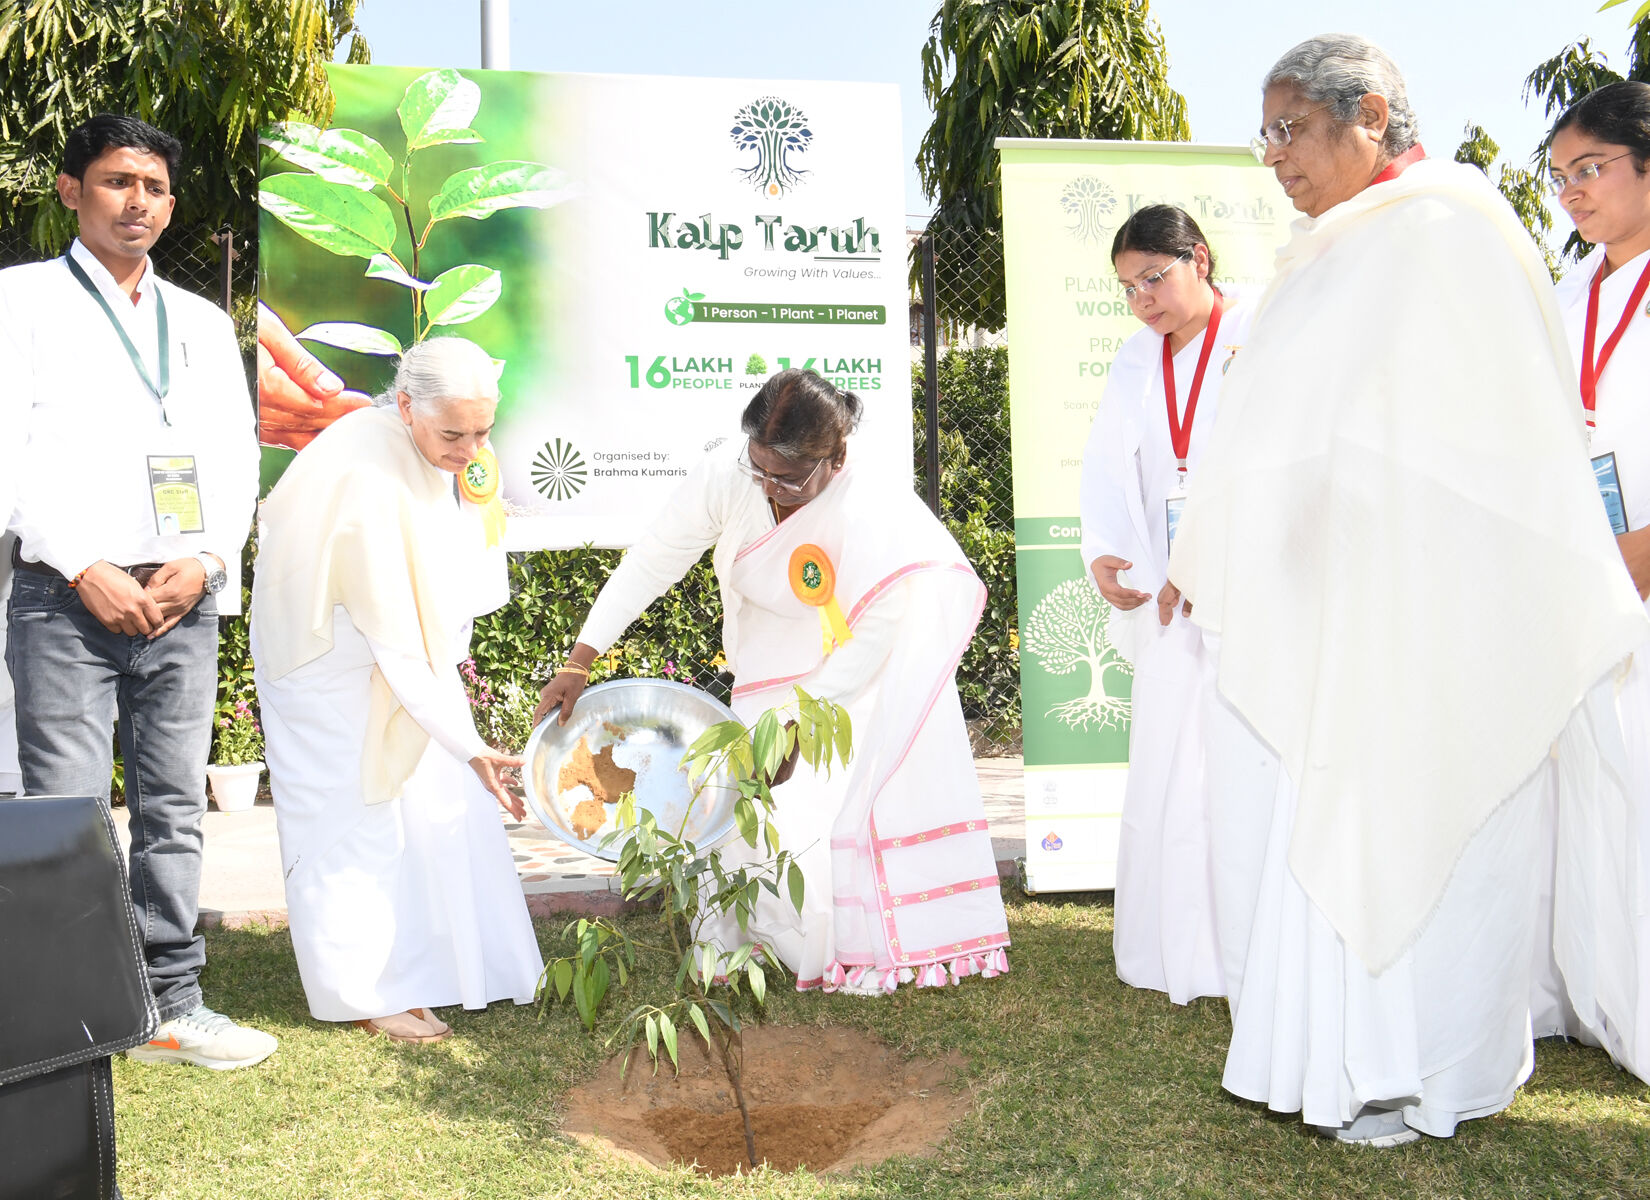 With Smt Droupadi Murmu, President of India, planting a tree for the Kalp Taruh project, 2022